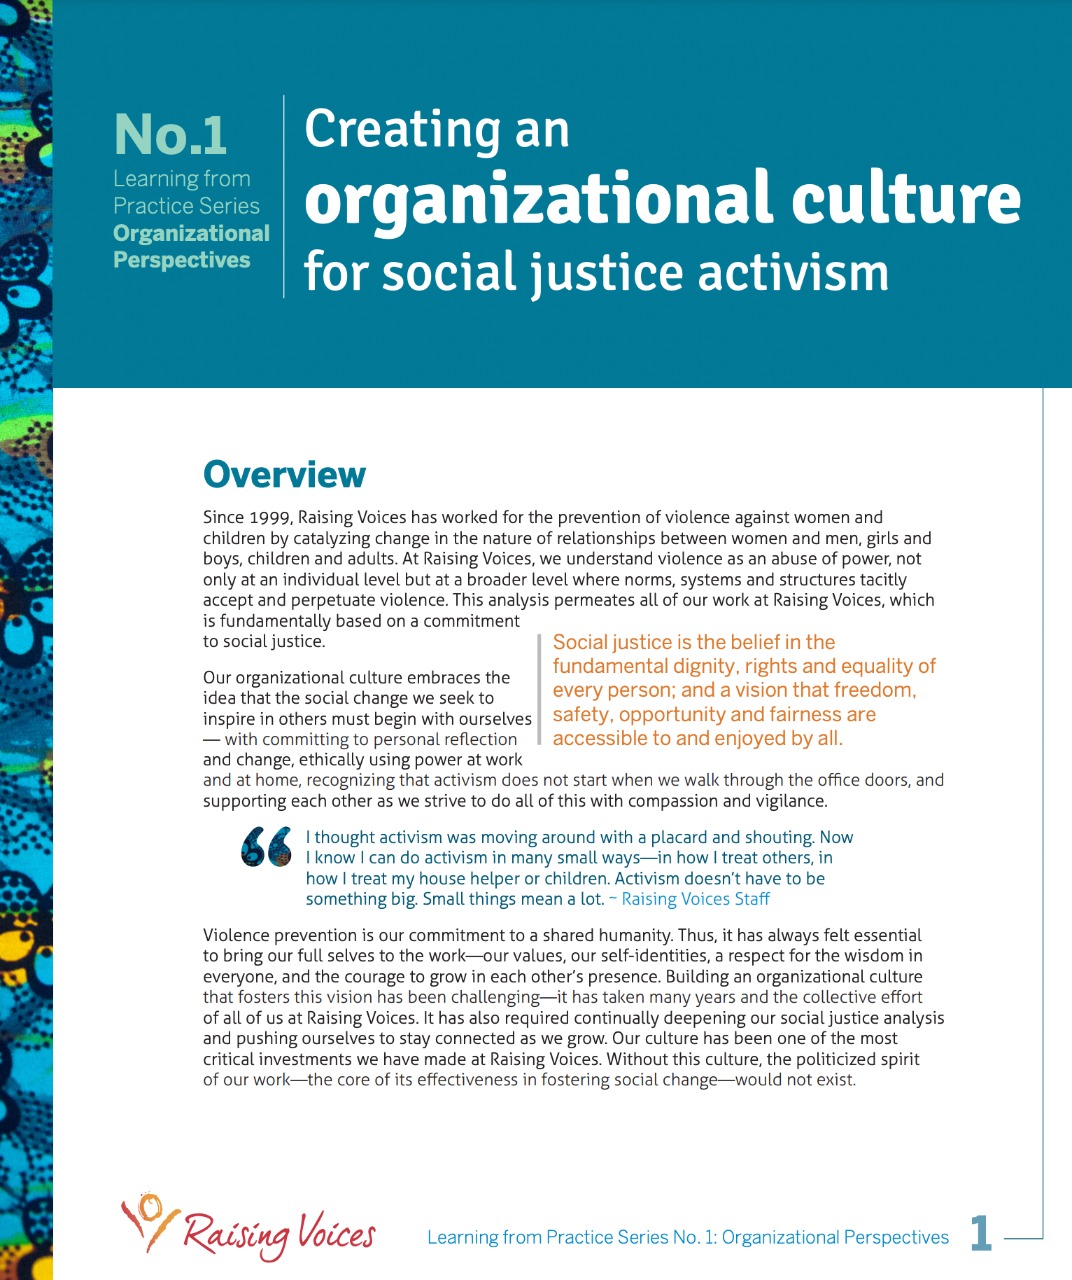 Creating an organizational culture for social justice activism